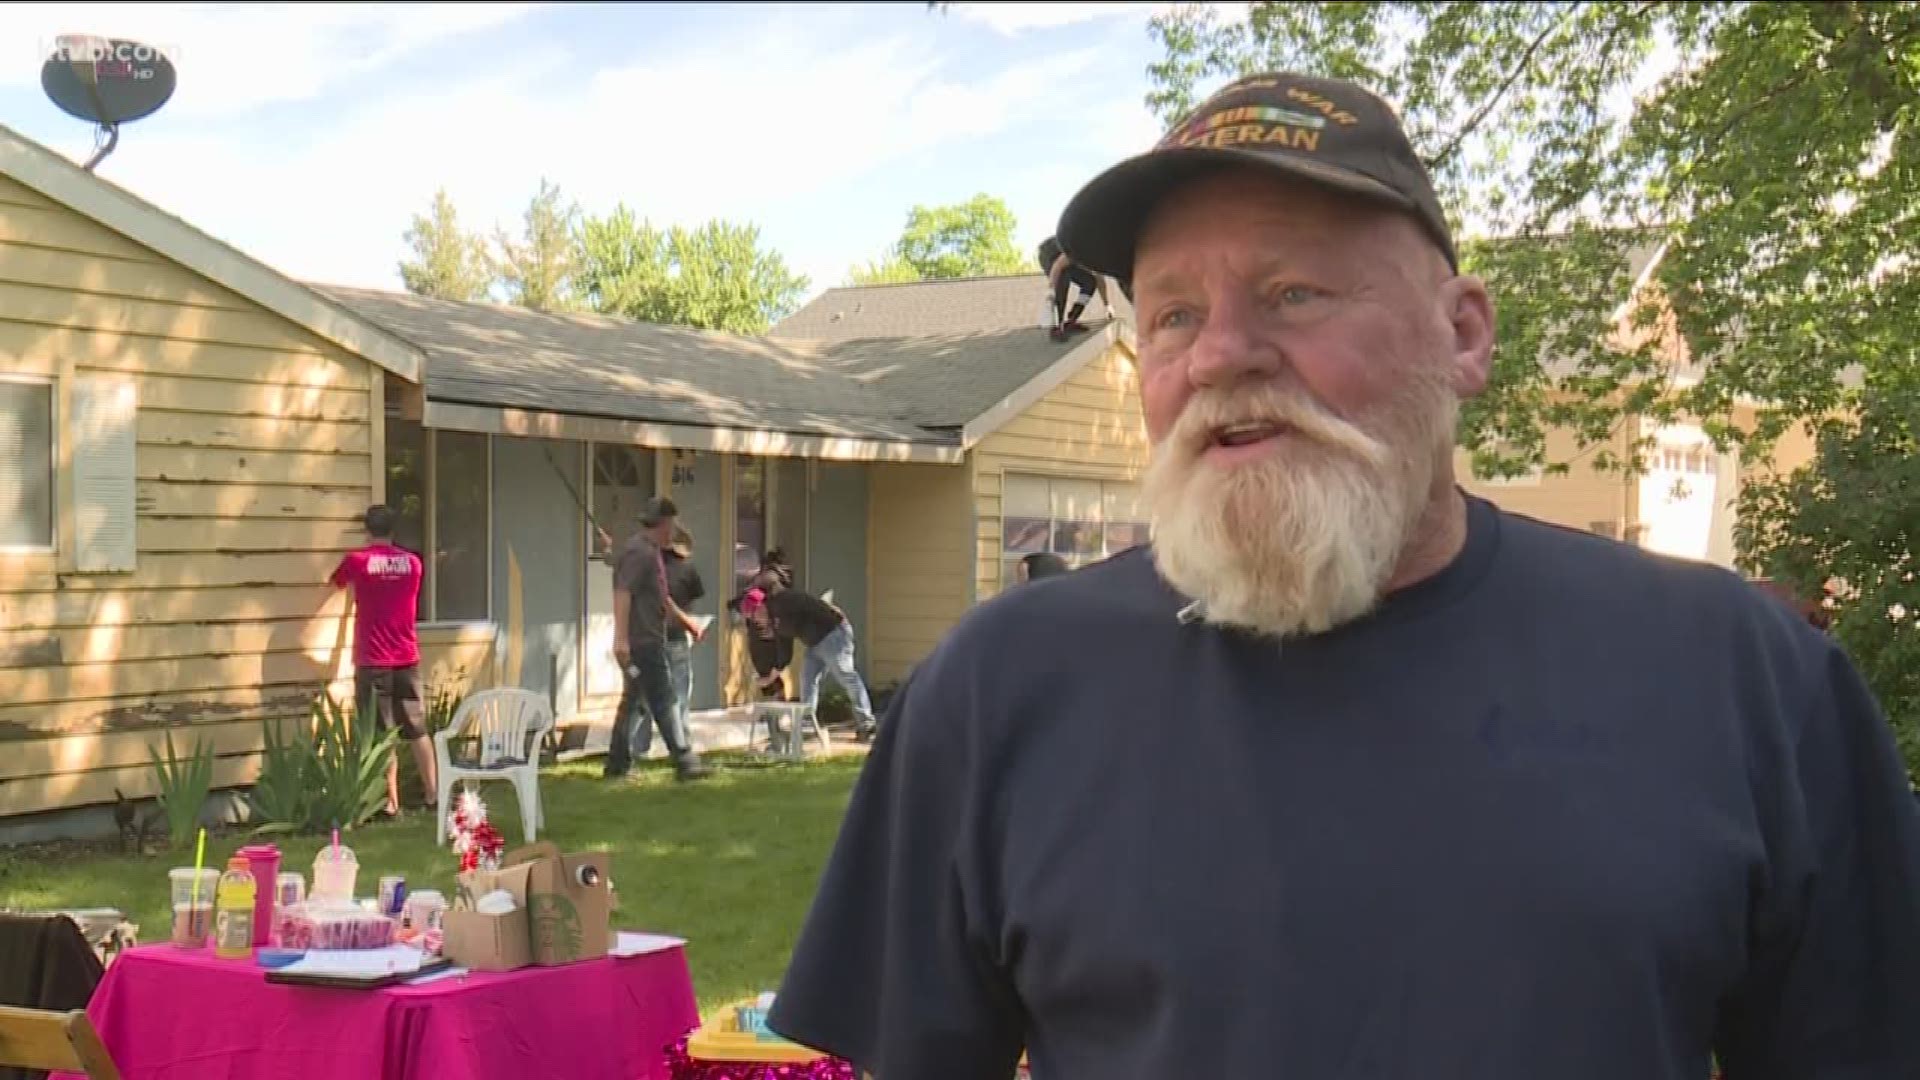 Over 700 volunteers spent hours over the weekend painting the homes of veterans and disabled residents across the Treasure Valley.